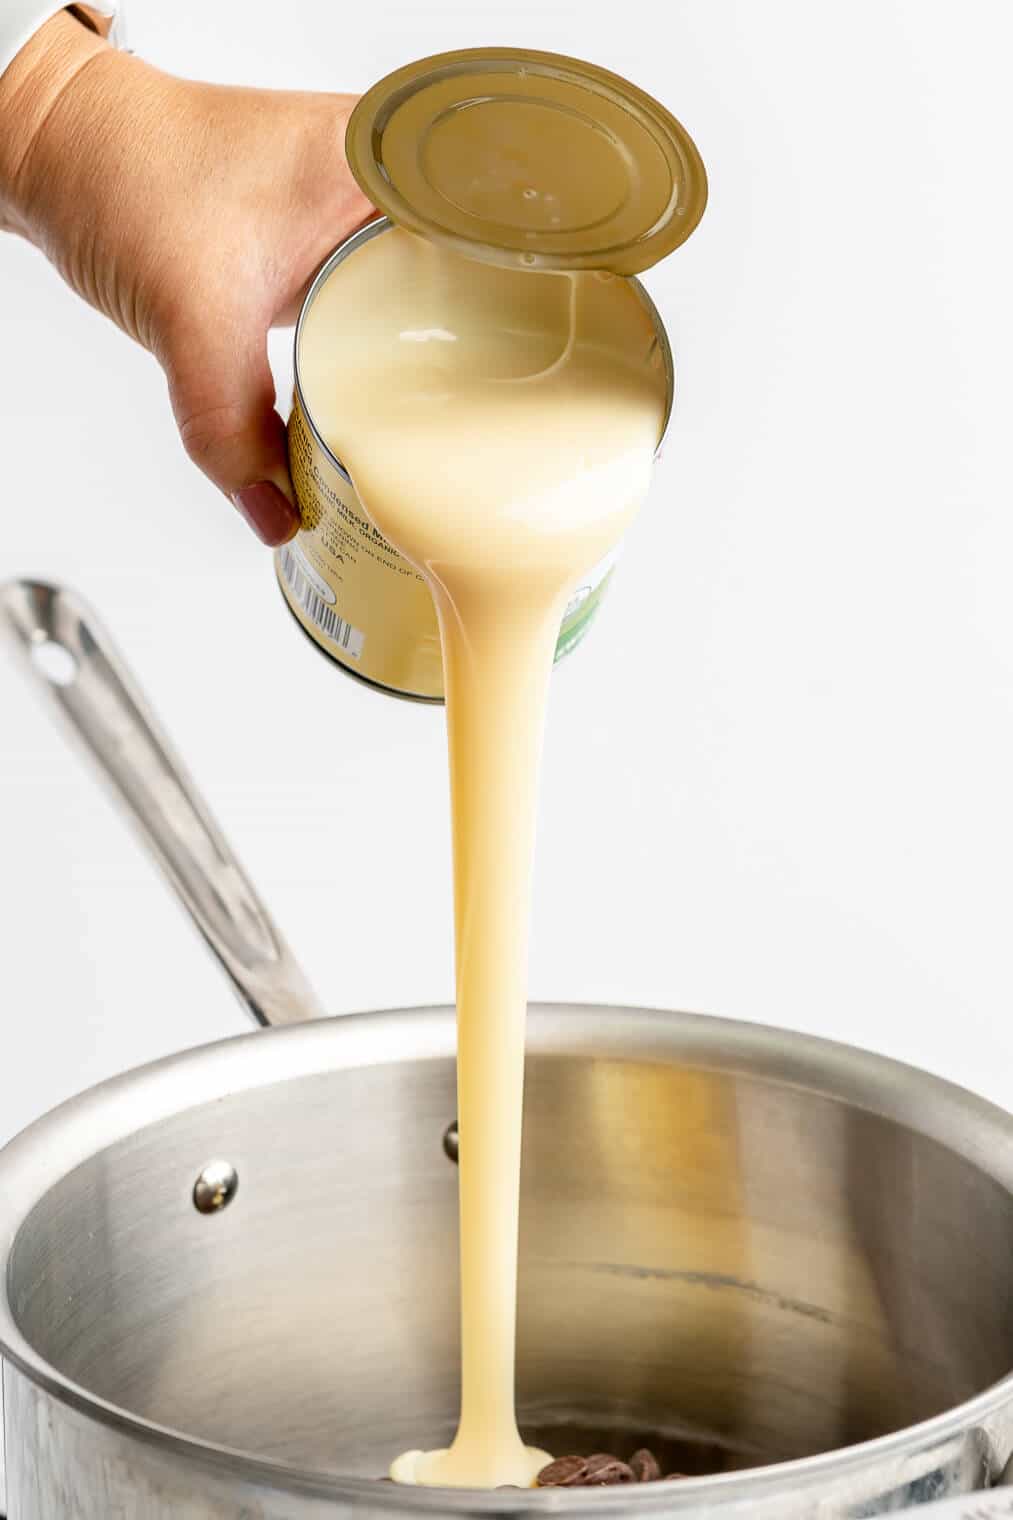 Hand pouring sweetened condensed milk into a stainless steel saucepan.